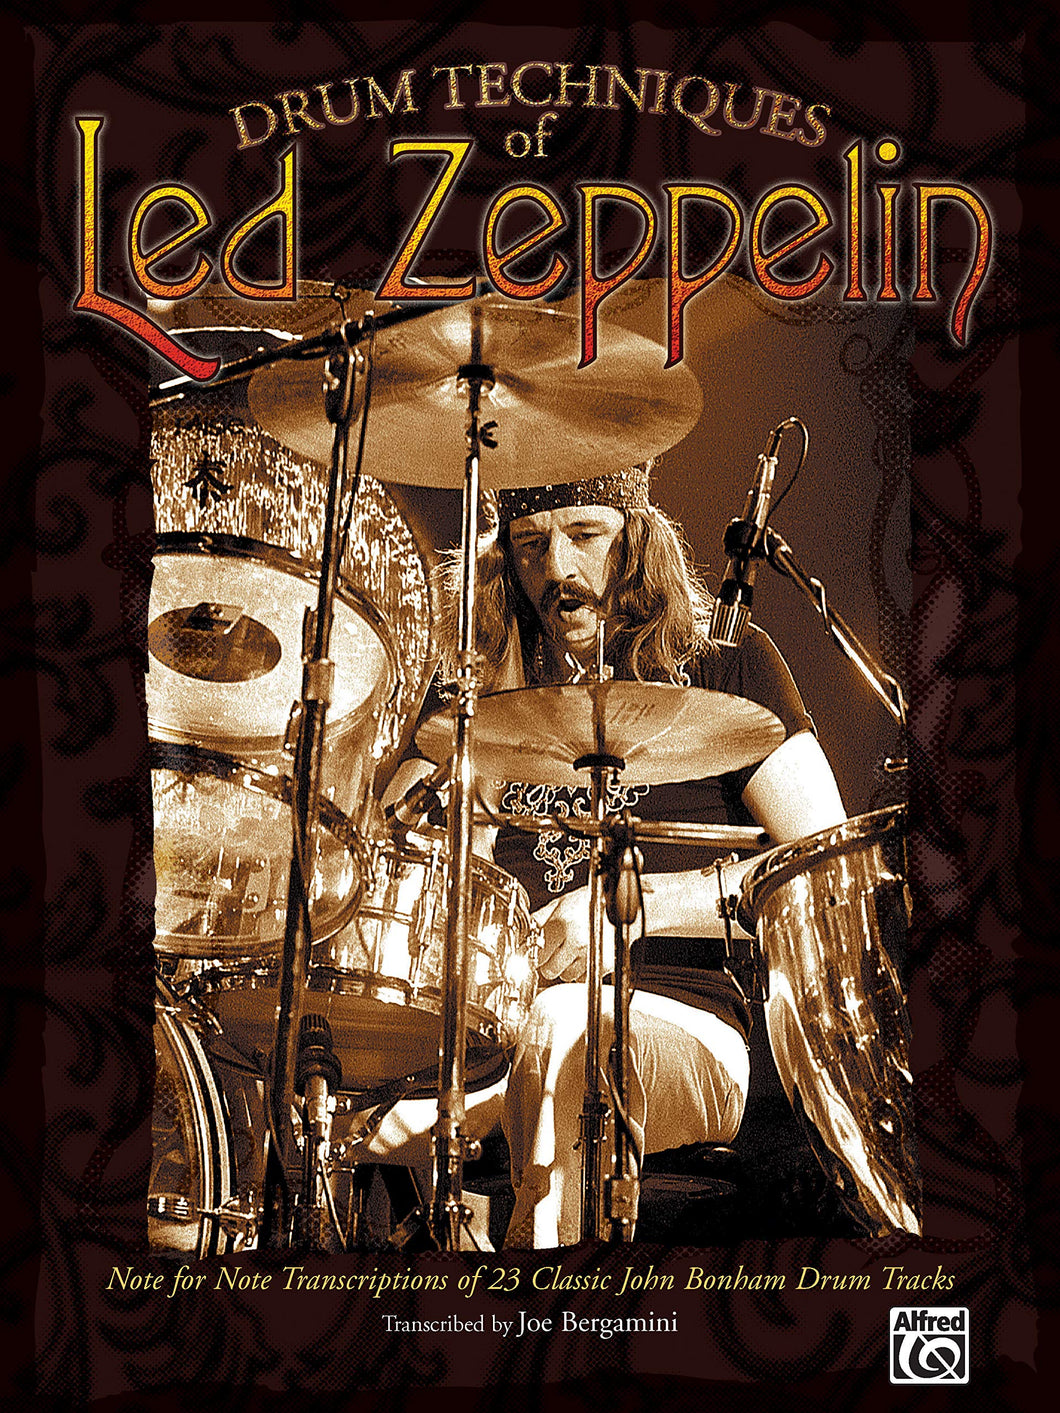 The Wanton Song - Led Zeppelin - Collection of Drum Transcriptions / Drum Sheet Music - Alfred Music DTLZNFNT